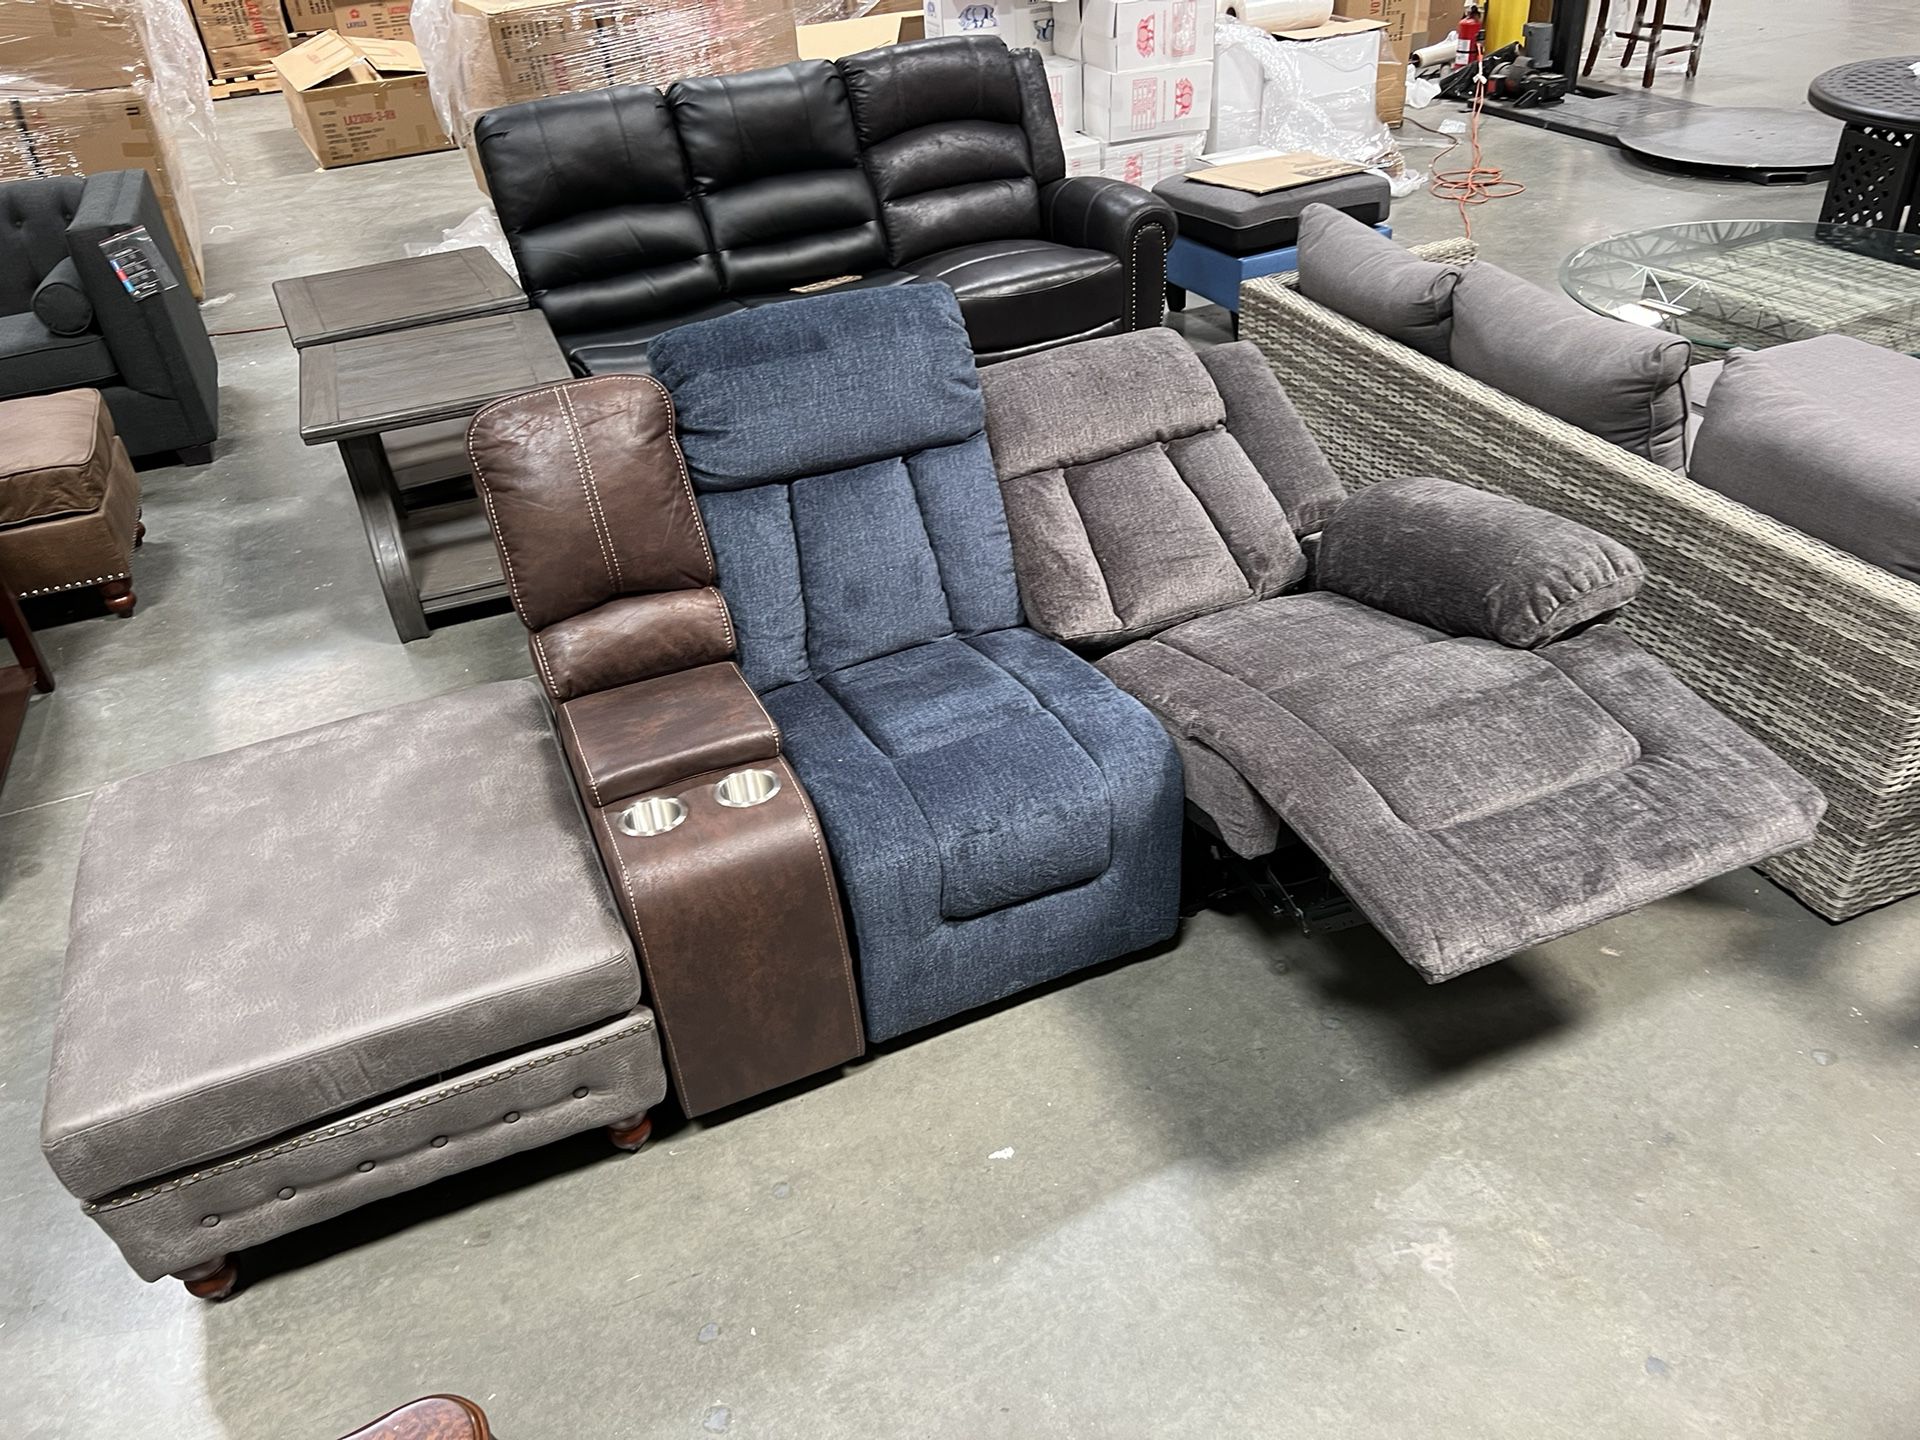 New! Extra Comfort Power Recliner, Recliner Chair + Center Console With Cupholders And Ottoman, USB Charger Recliner Chair, Recliner, Sofa Recliner